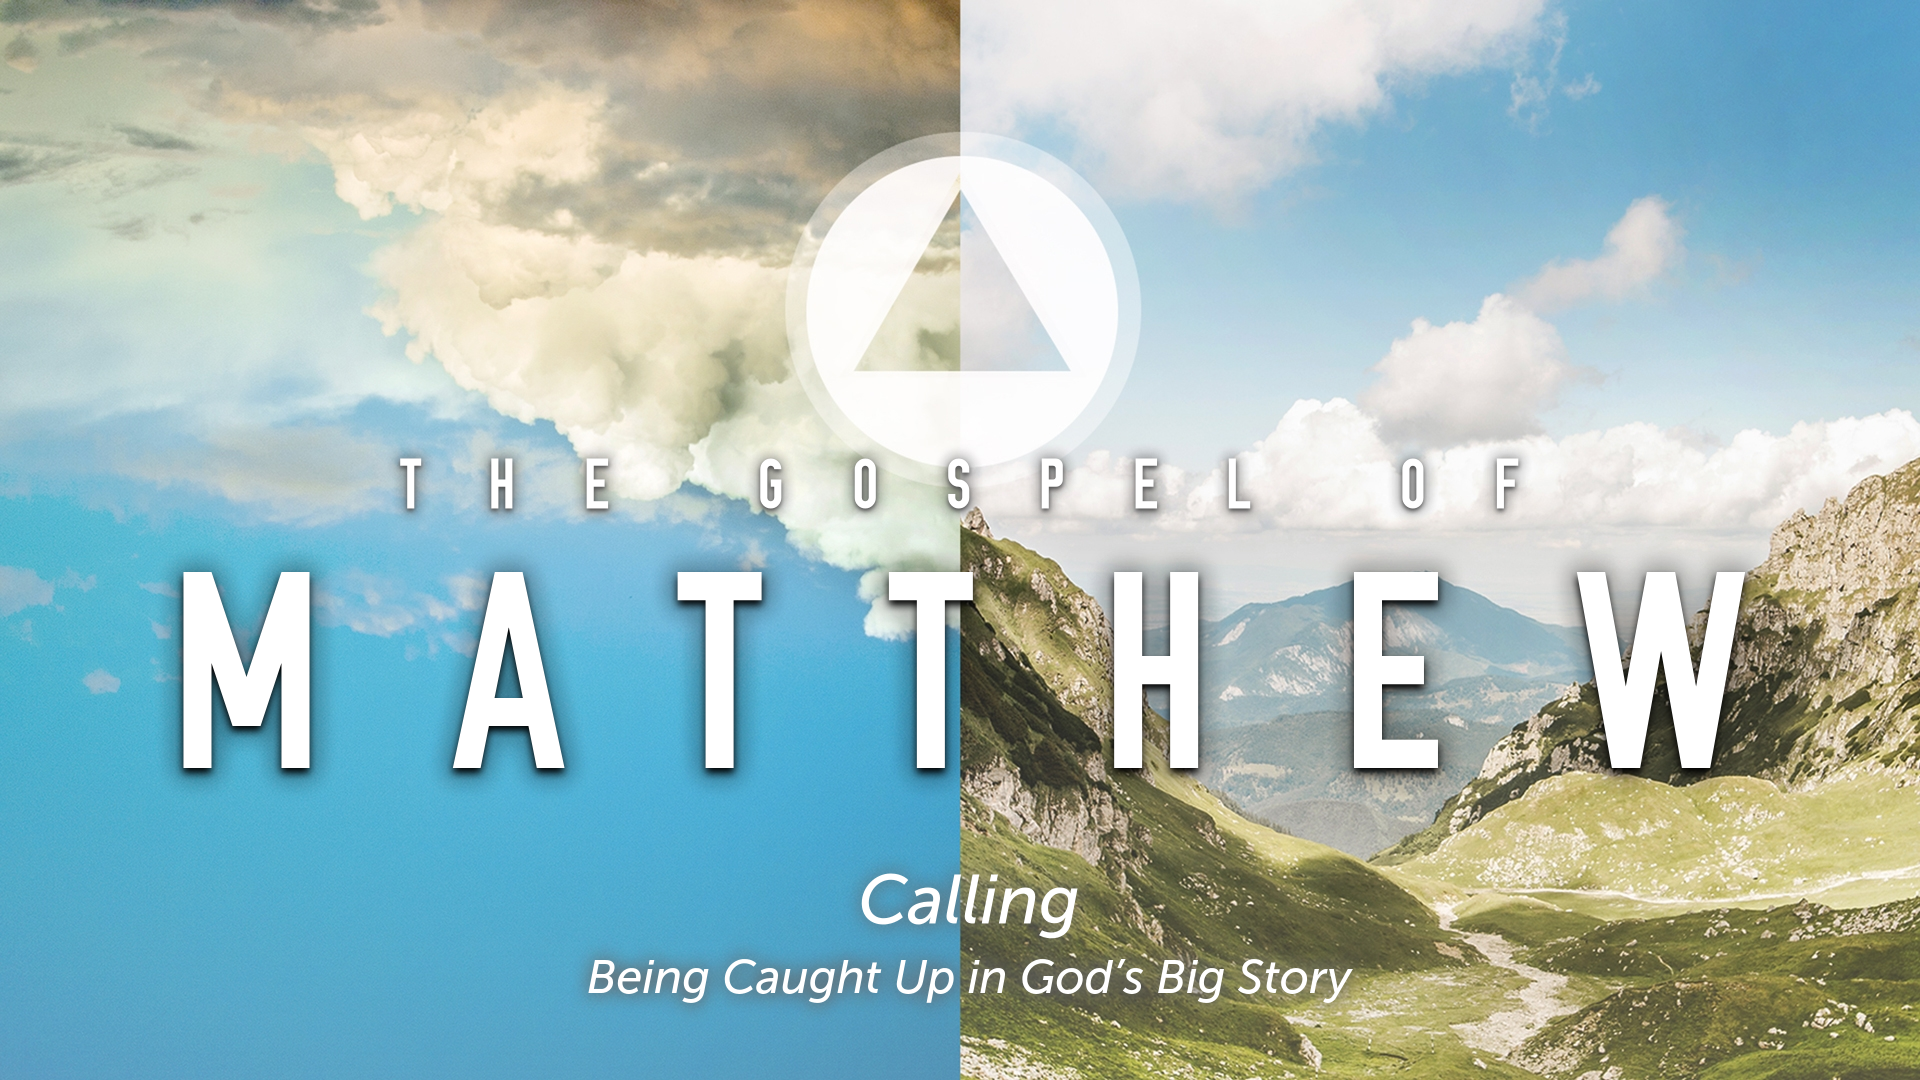 Calling: Being Caught up in God's Big Story